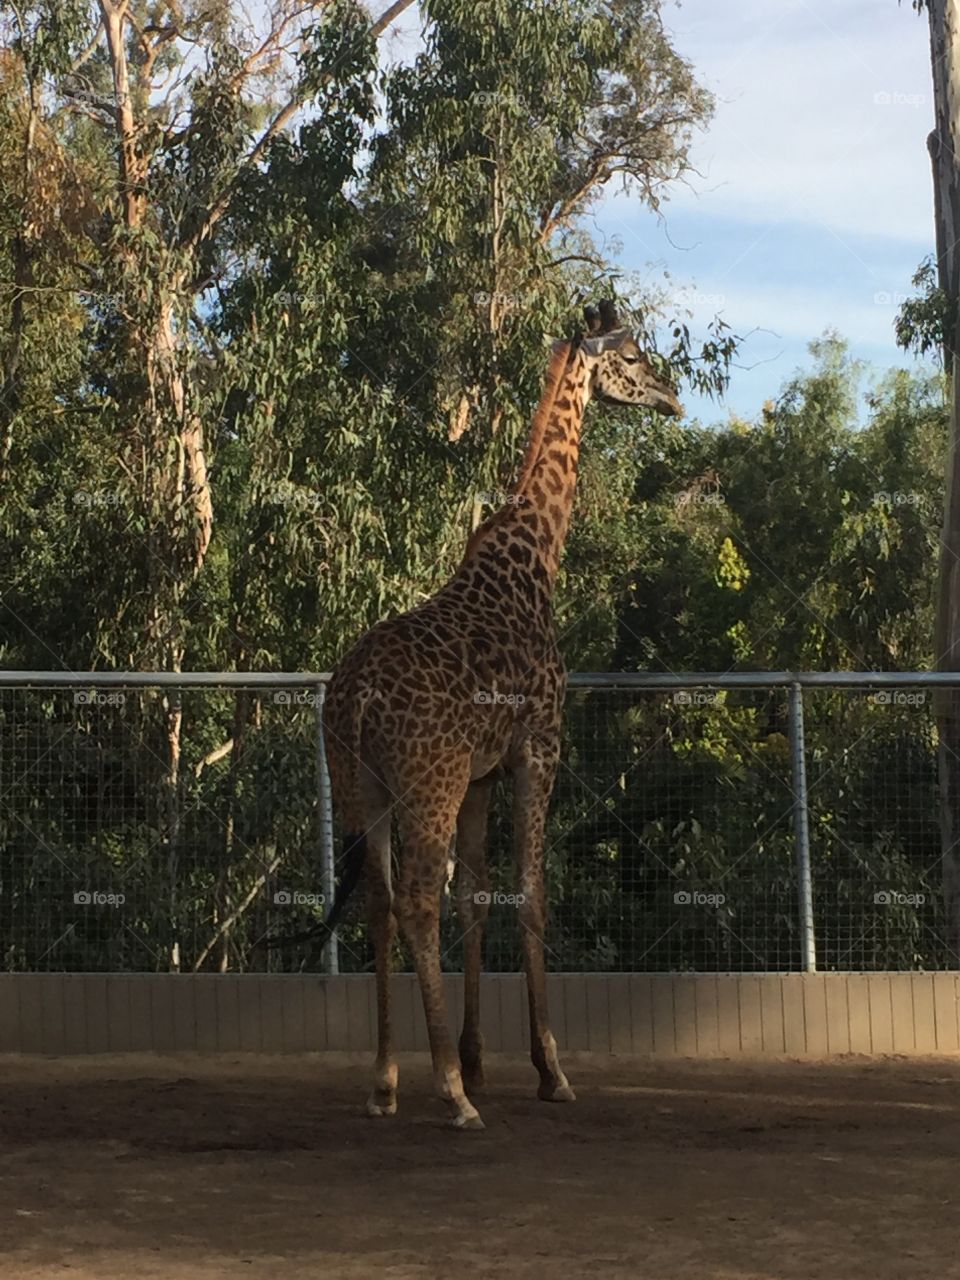 Giraffe standing next to a fence in an enclosure at San Diego Zoo, California 